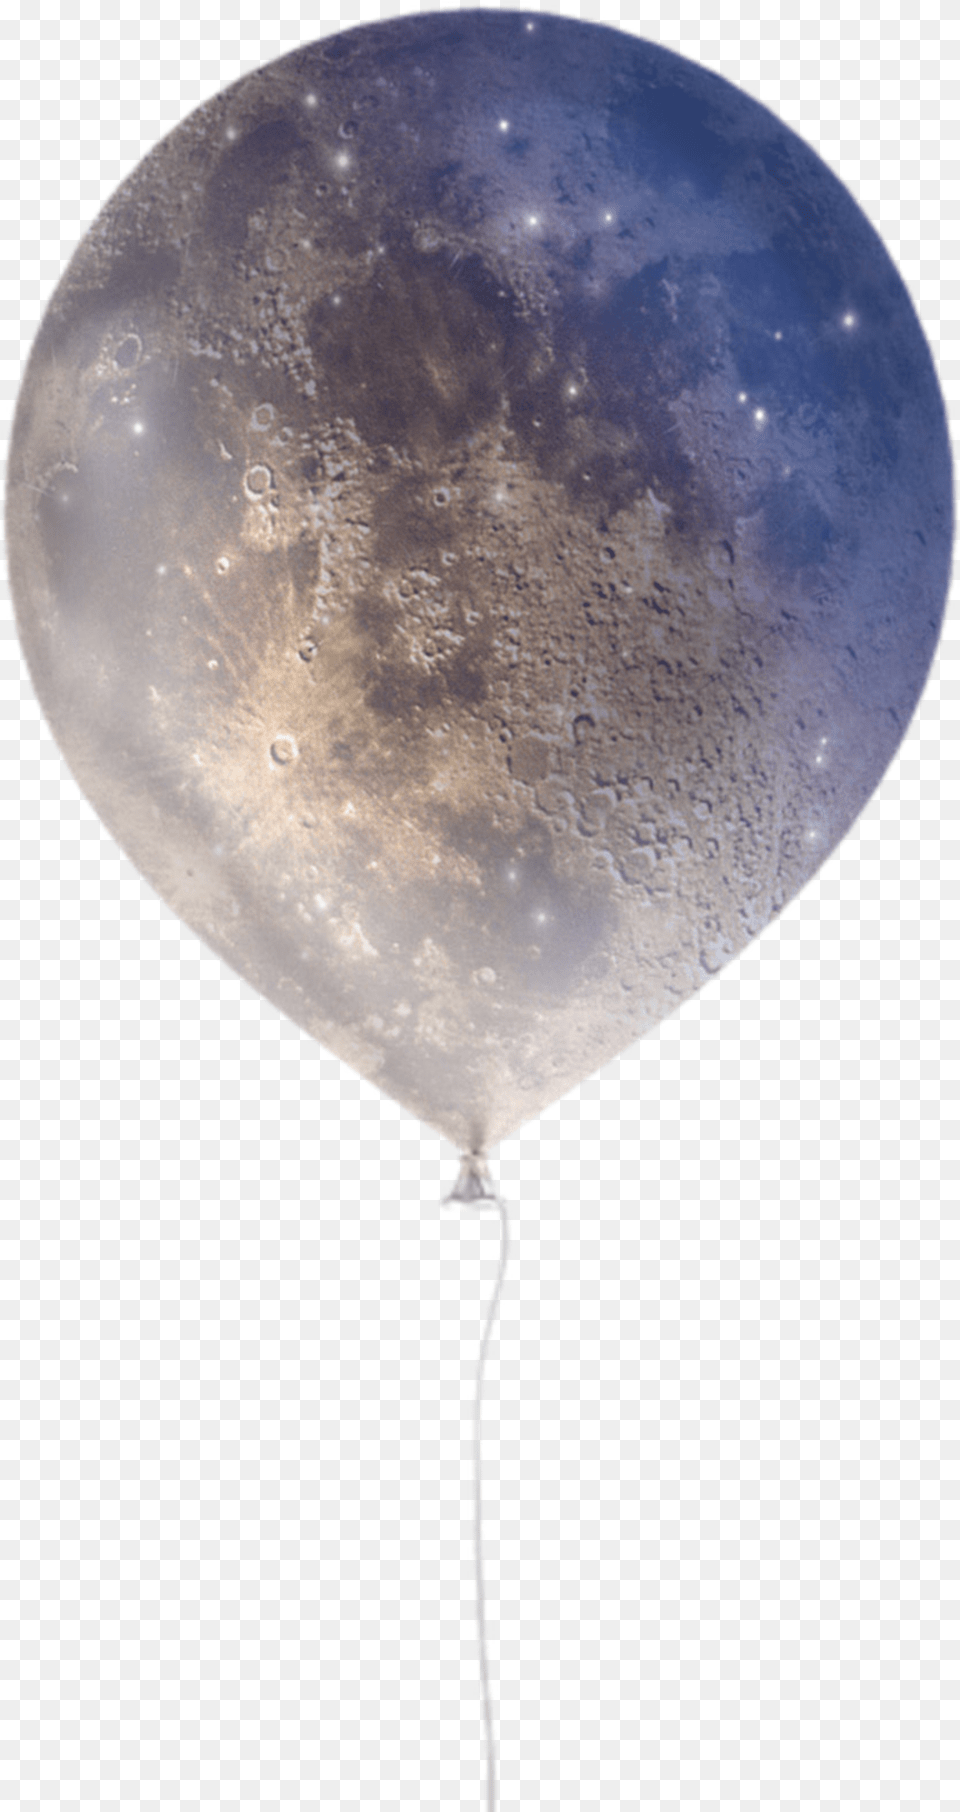 Moon Balloon Sticker By Jacqueline Balloon Free Transparent Png